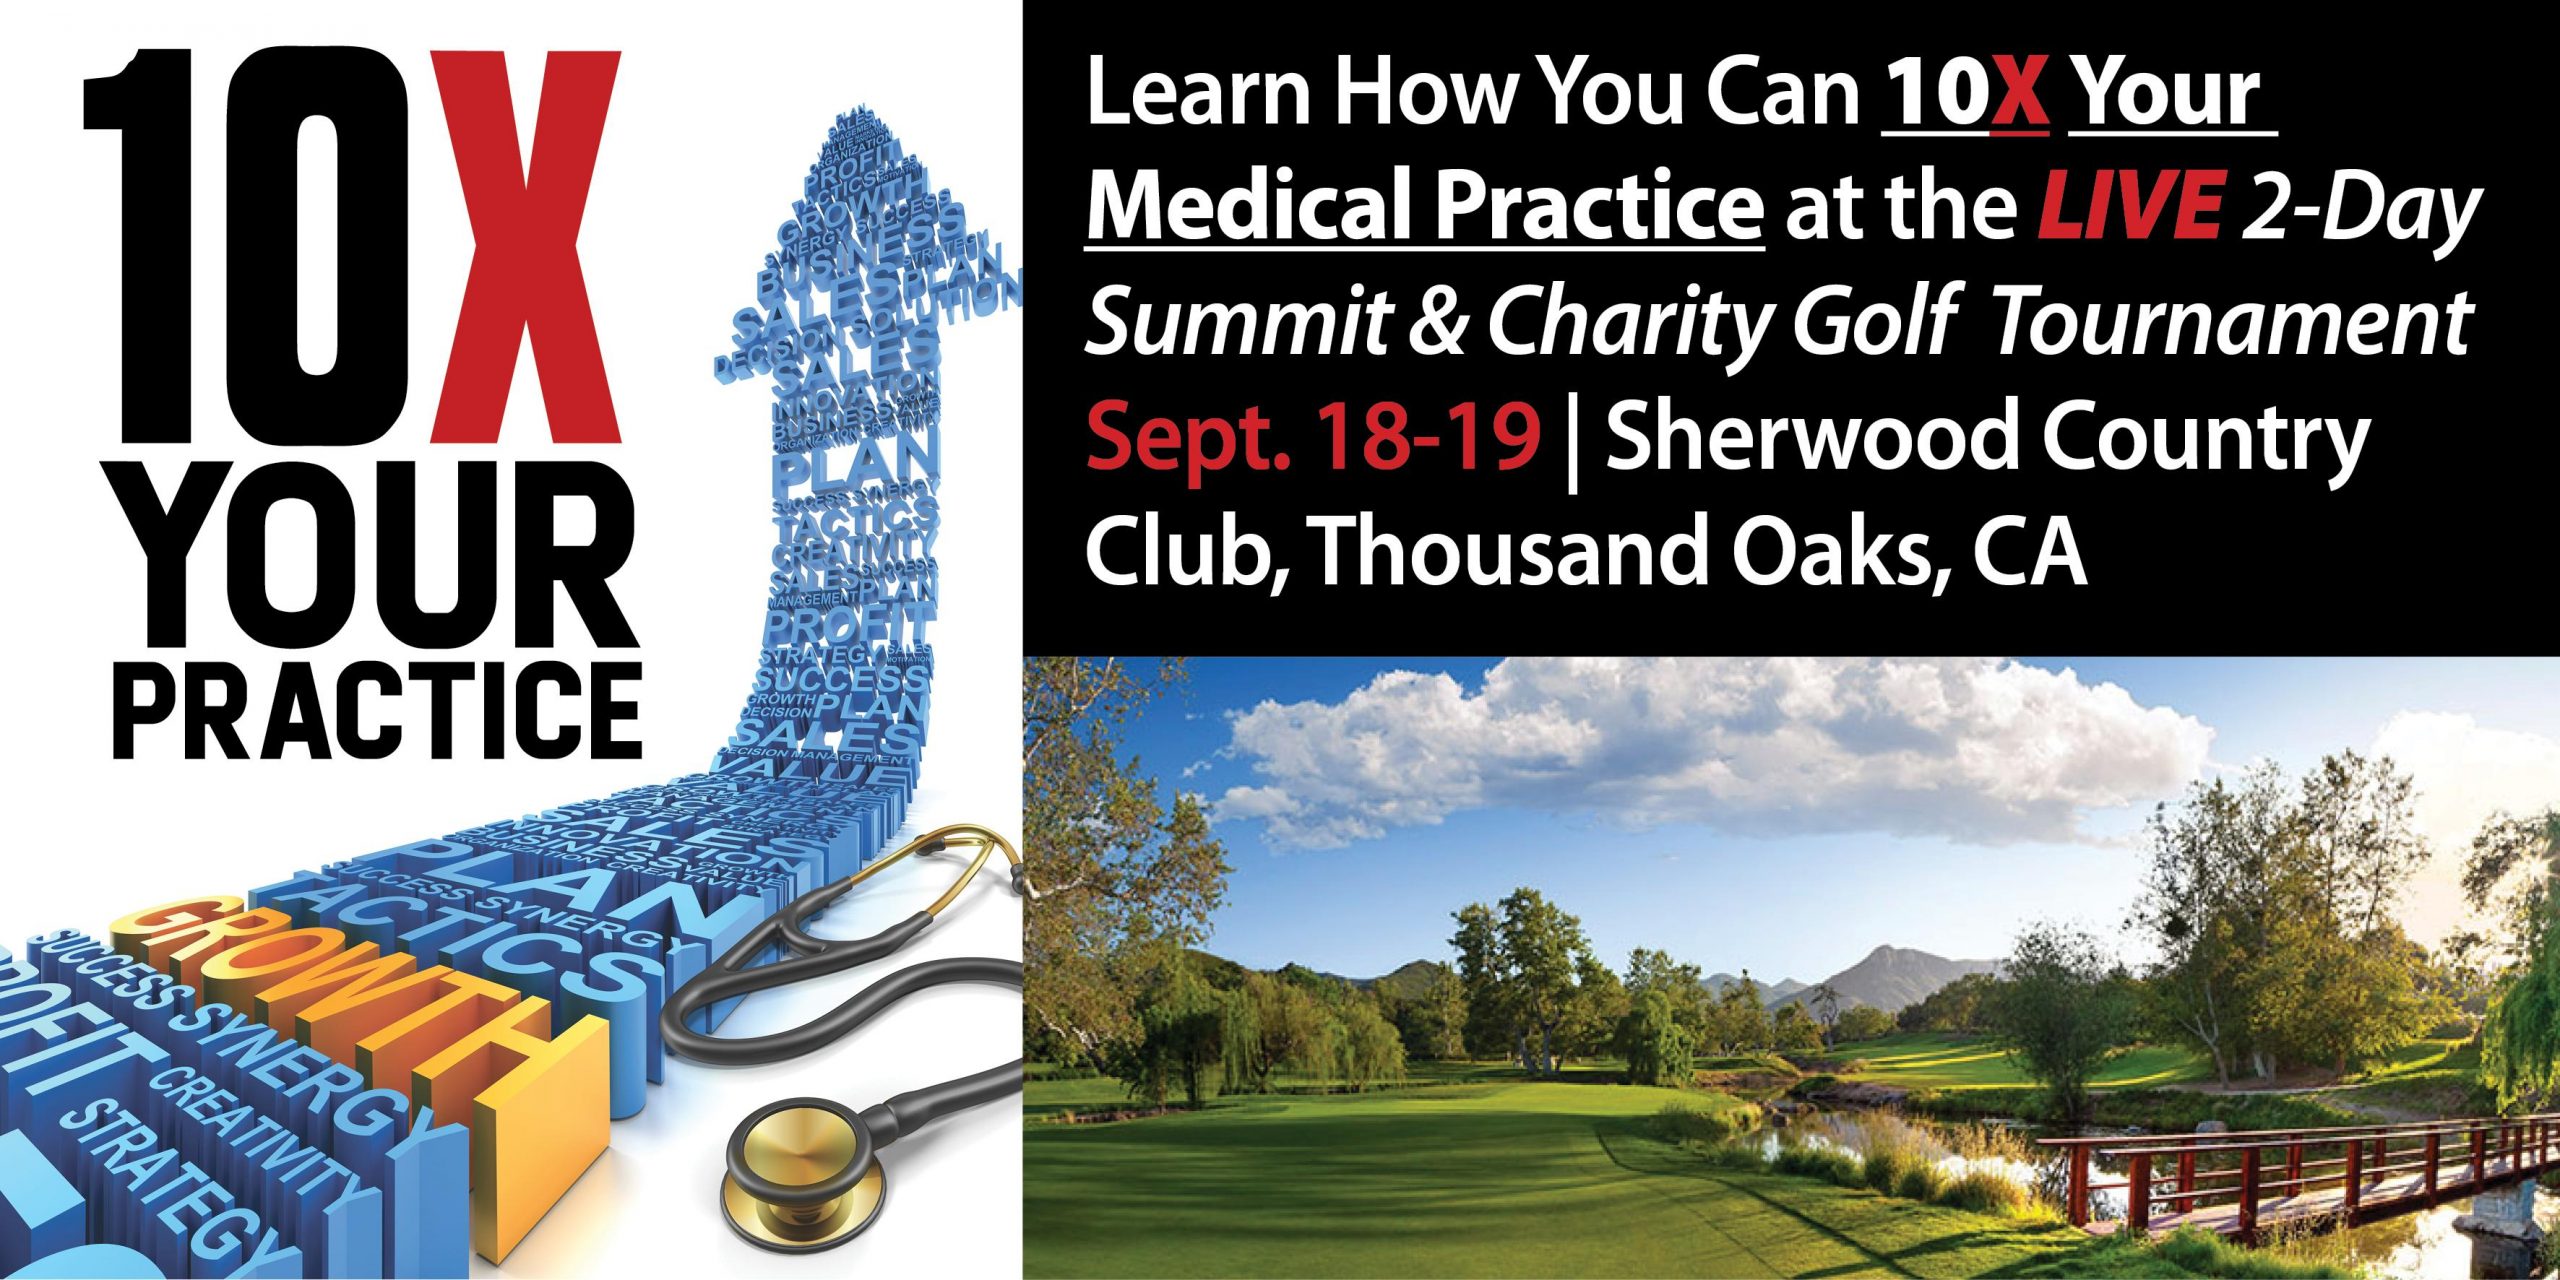 10X Your Medical Practice Summit & Charity Golf Tournament